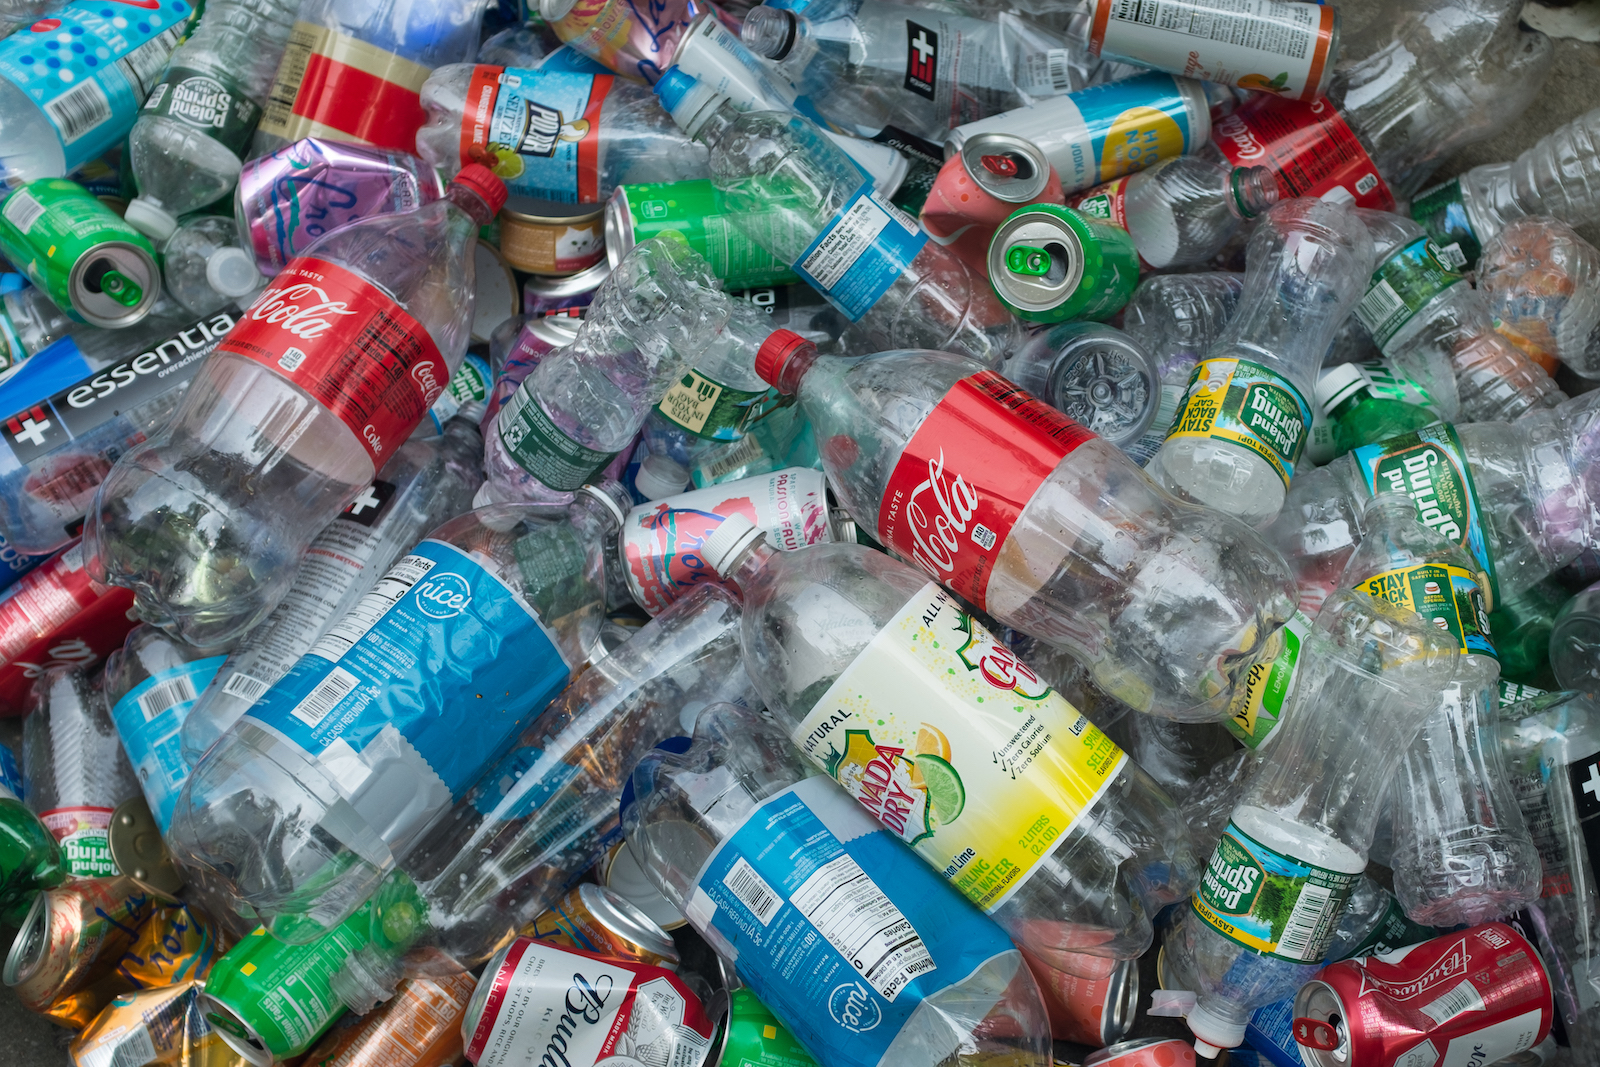 A large pile of plastic bottles and cans collected on a street corner in downtown Manhattan, New York.